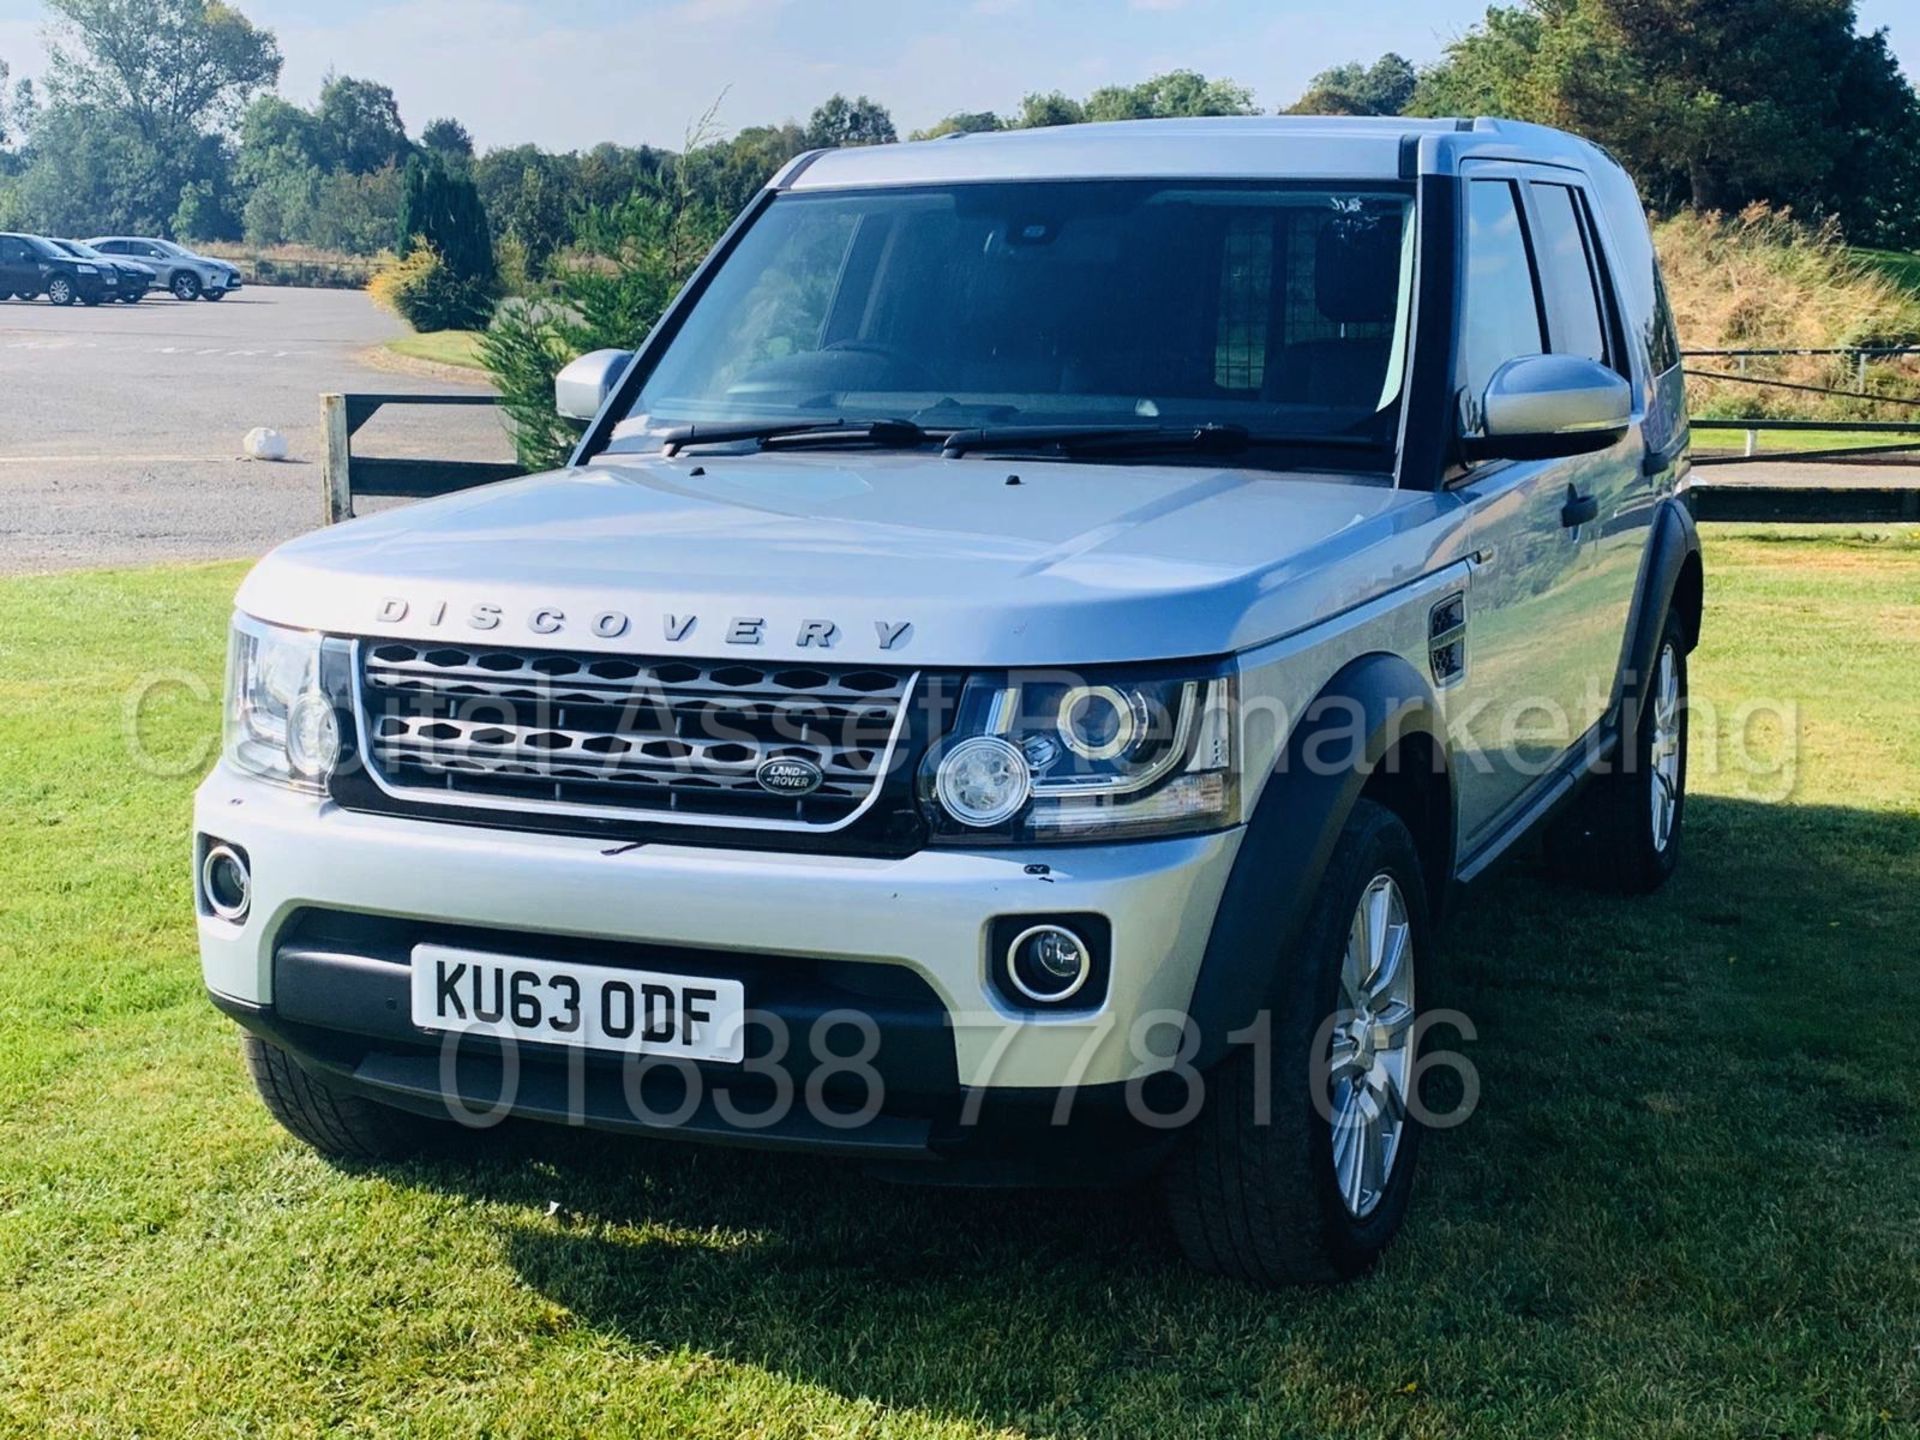 LAND ROVER DISCOVERY *XS EDITION* (2014) '3.0 SDV6 - 255 BHP - 8 SPEED AUTO' *LEATHER & SAT NAV* - Image 2 of 50